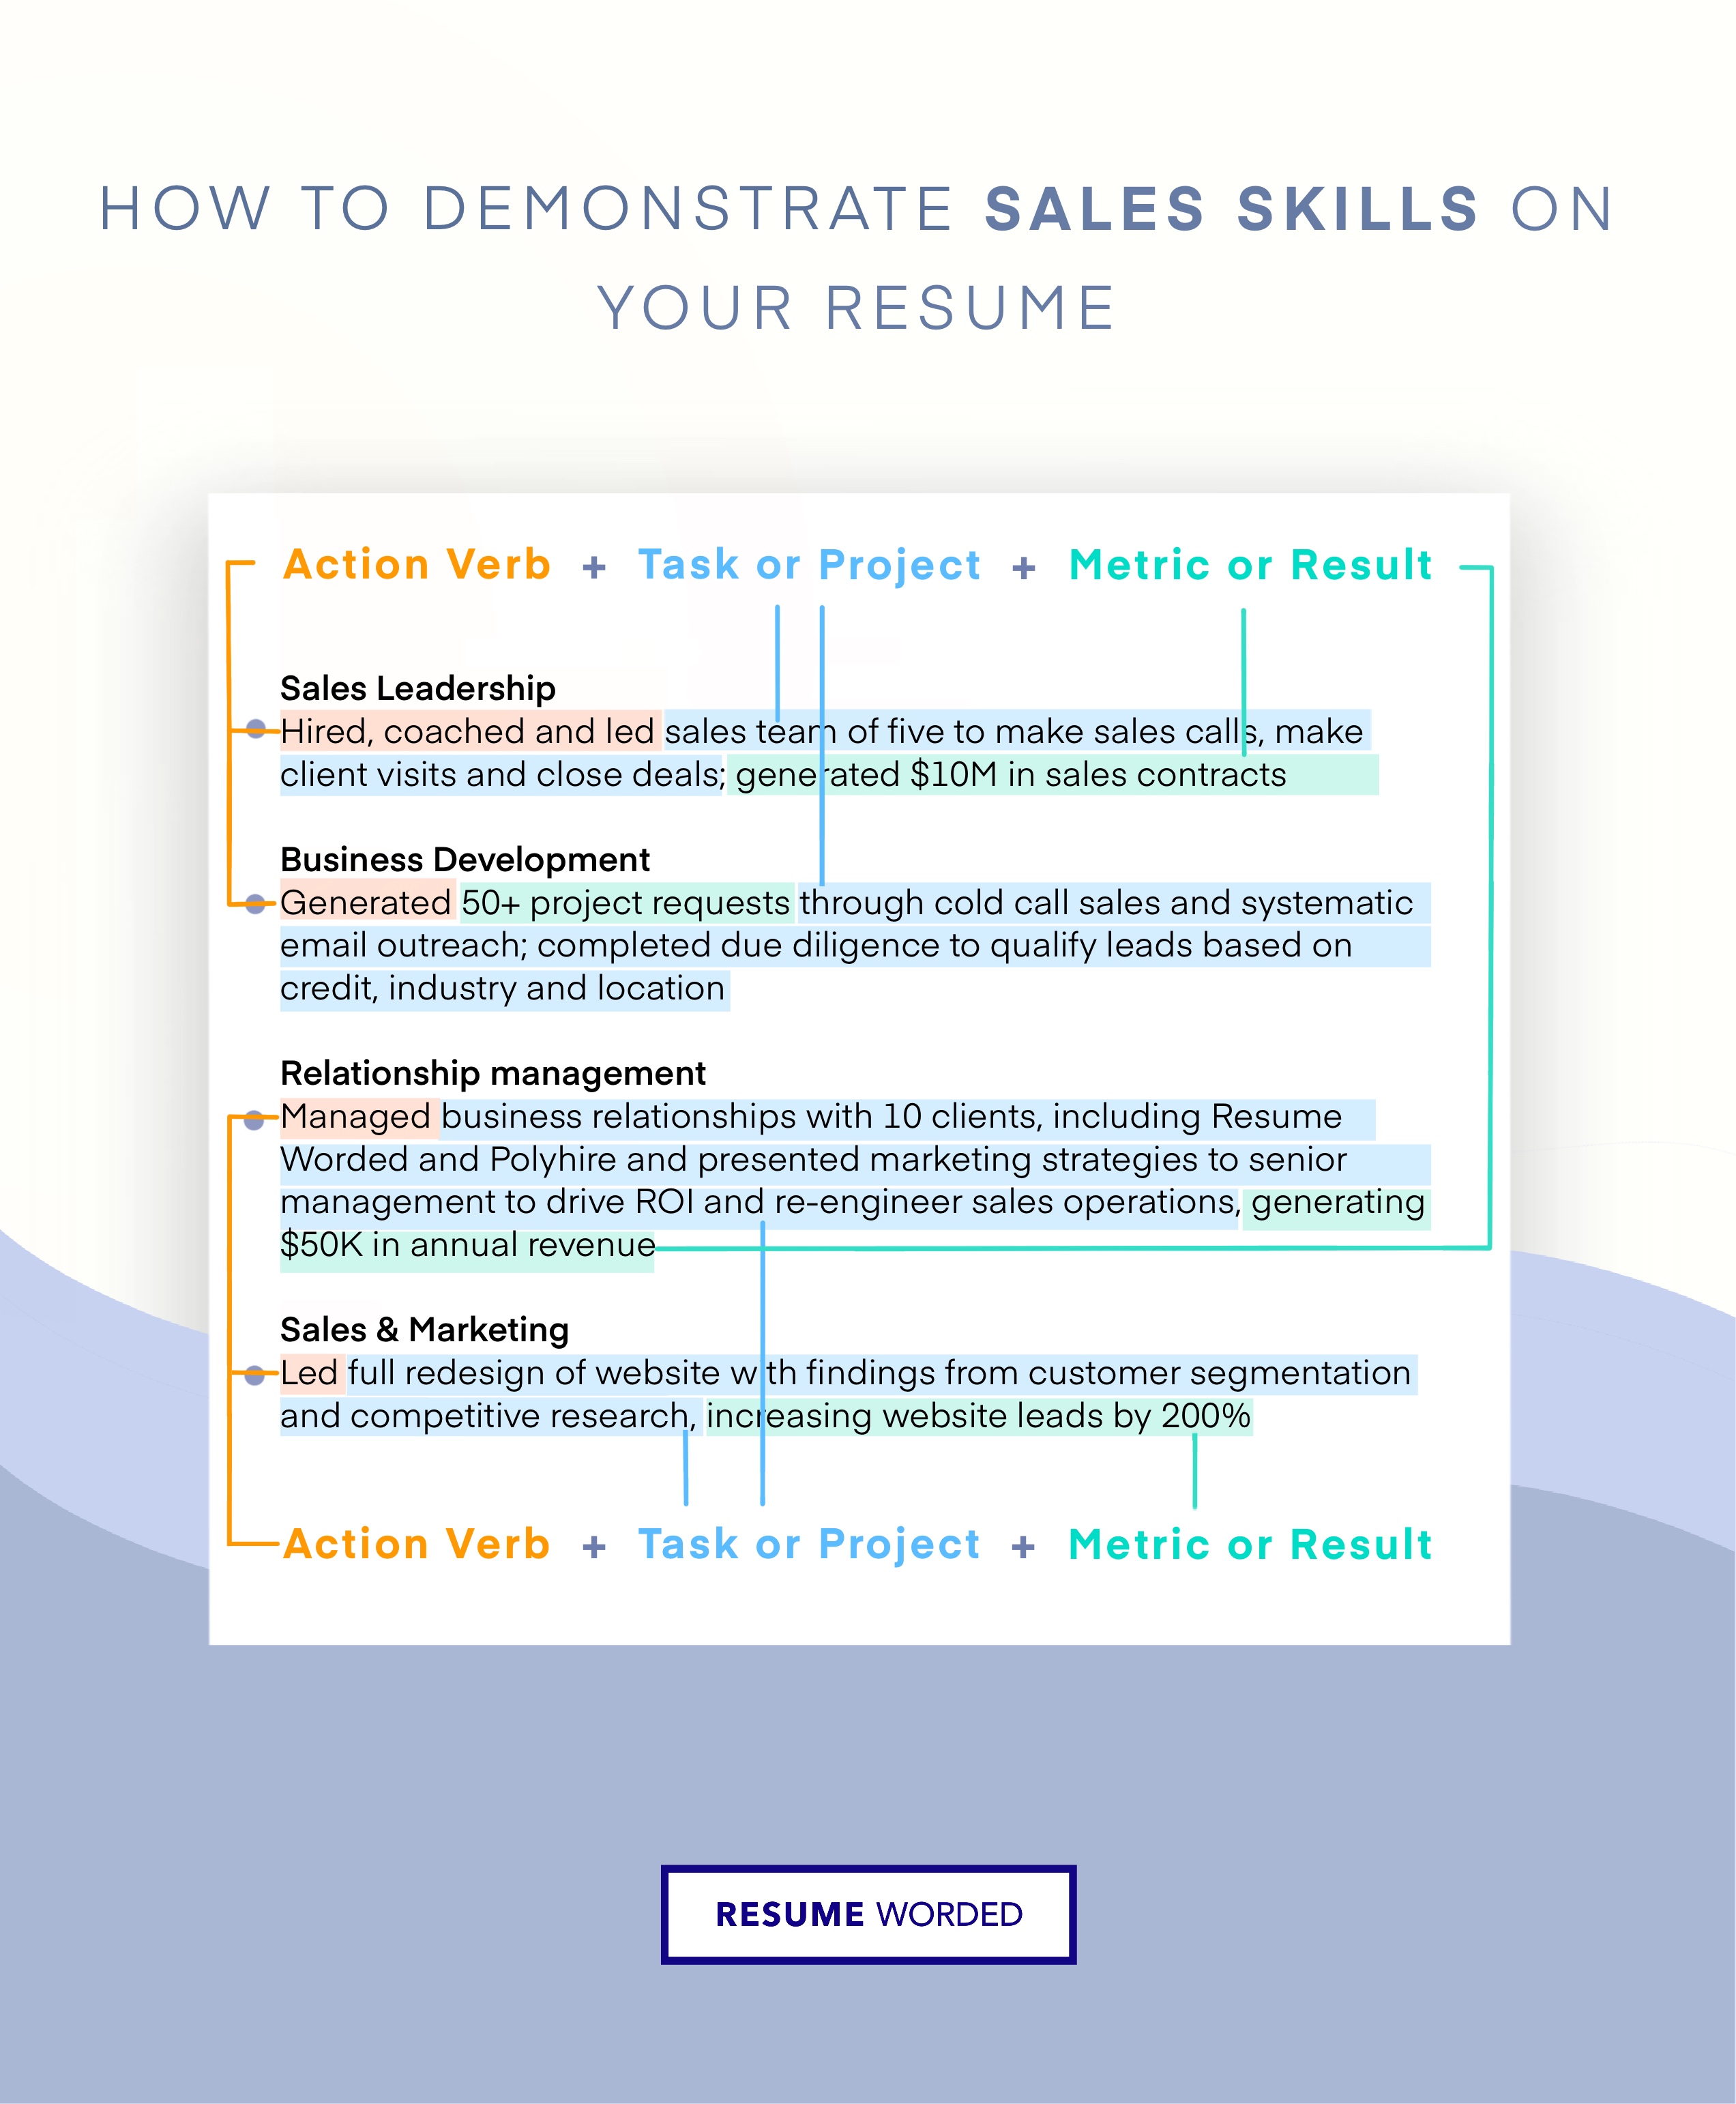 Demonstrate your ability to forecast sales and build reports - Sales Manager Resume